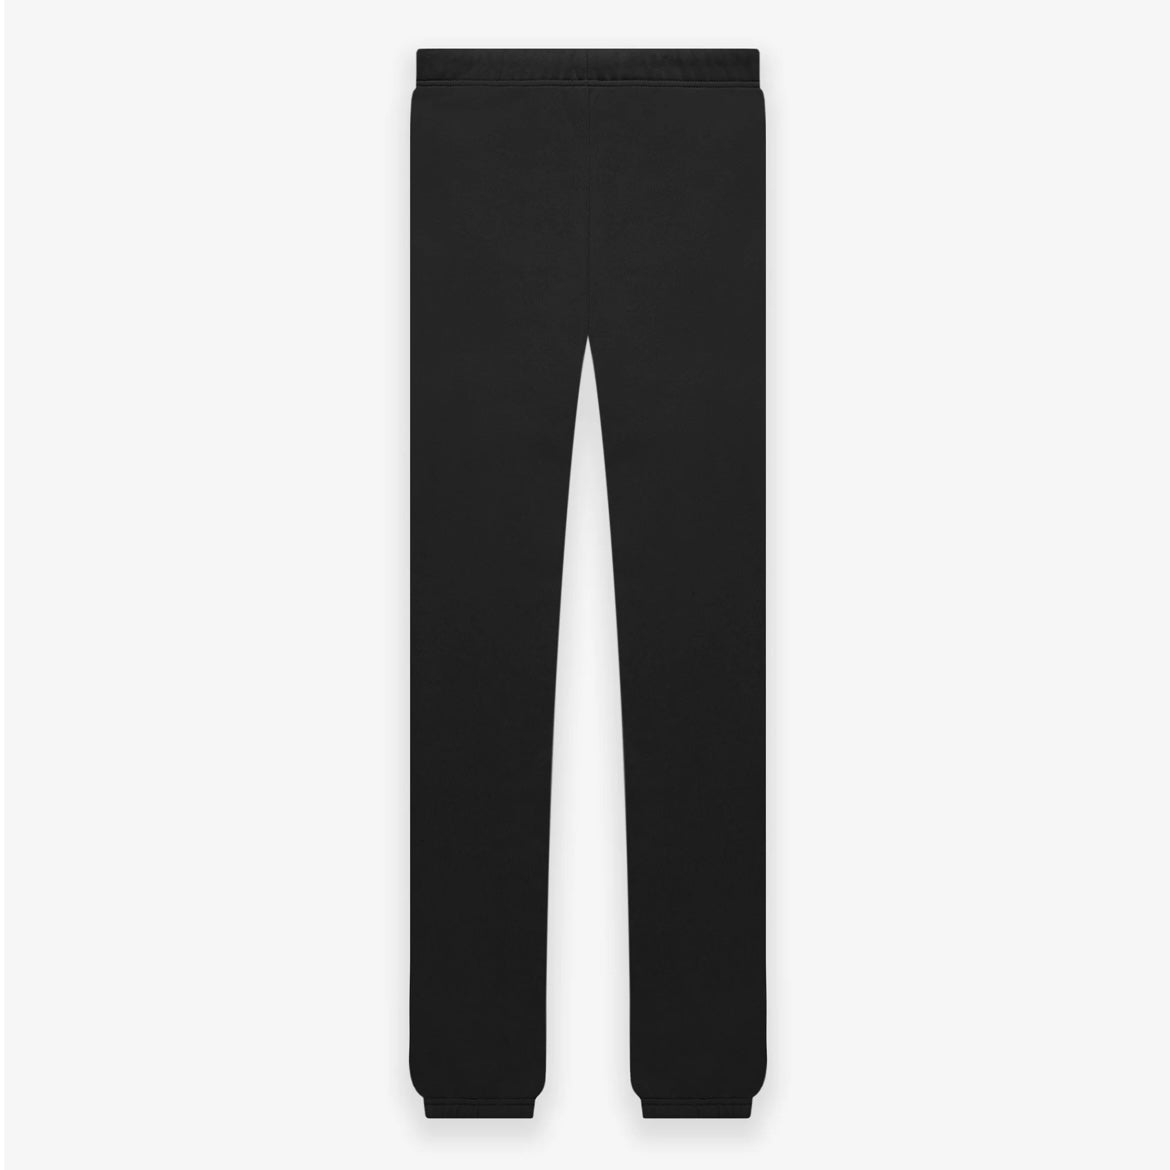 Fear of God Essentials Stretch Limo Sweatpants Back View